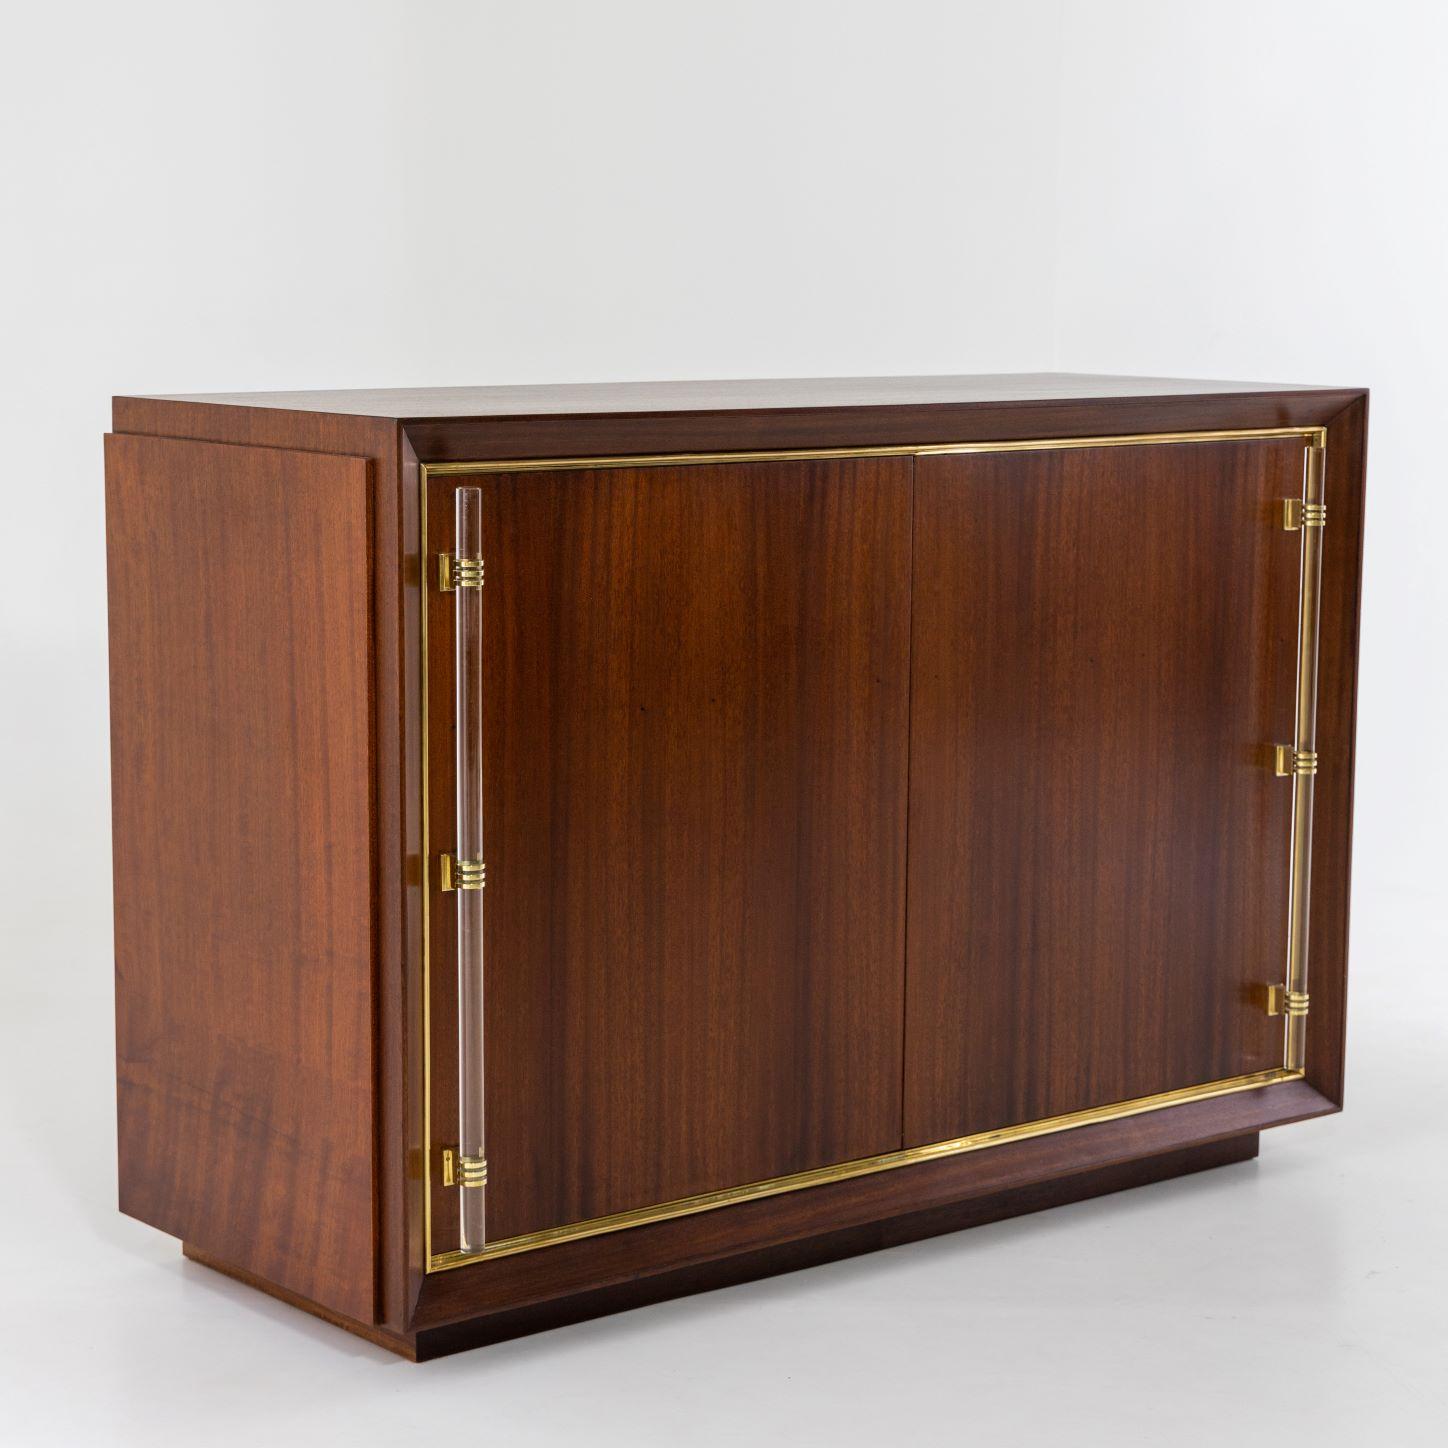 A Modernist two door cabinet. 
Mahogany with glass handles and brass details.
Featuring unique sliding door mechanism.